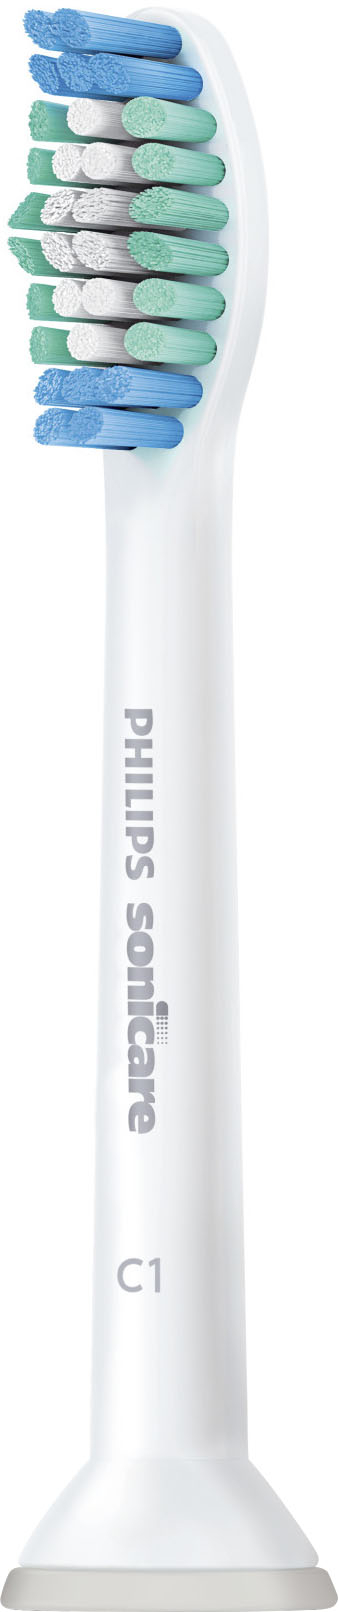 Philips Sonicare 1100 Power Toothbrush, Rechargeable Electric Toothbrush  White Grey HX3641/02 Best Buy